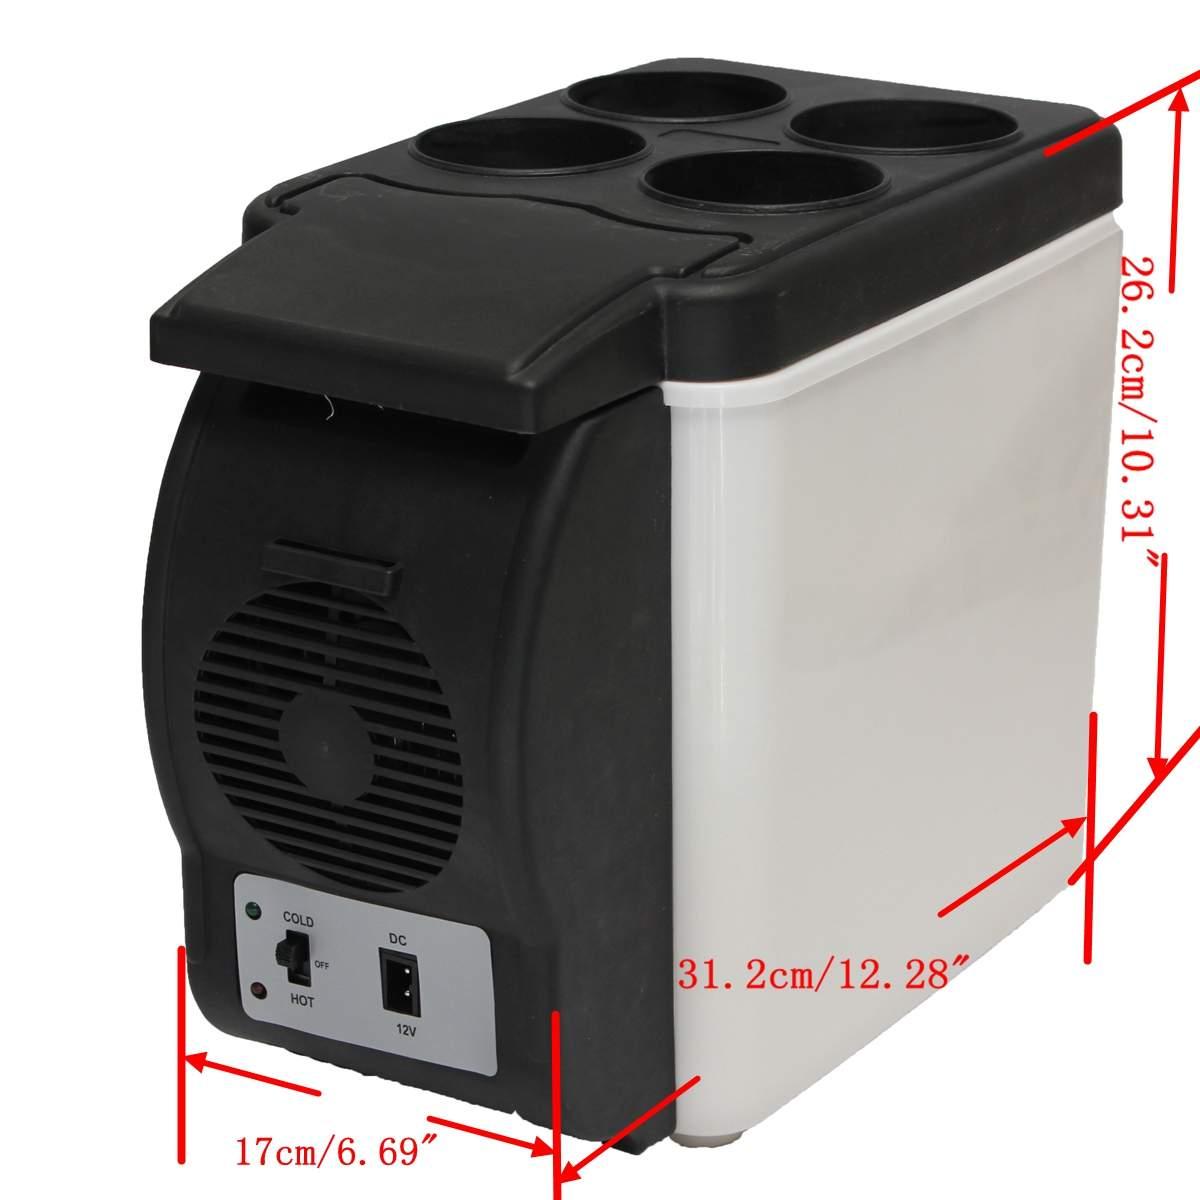 12V 45W 6L Auto Car Mini Fridge 2 In 1 Free-standing Less Noise Car Refrigerator Portable Geladeira for Cars Van Coche Camping